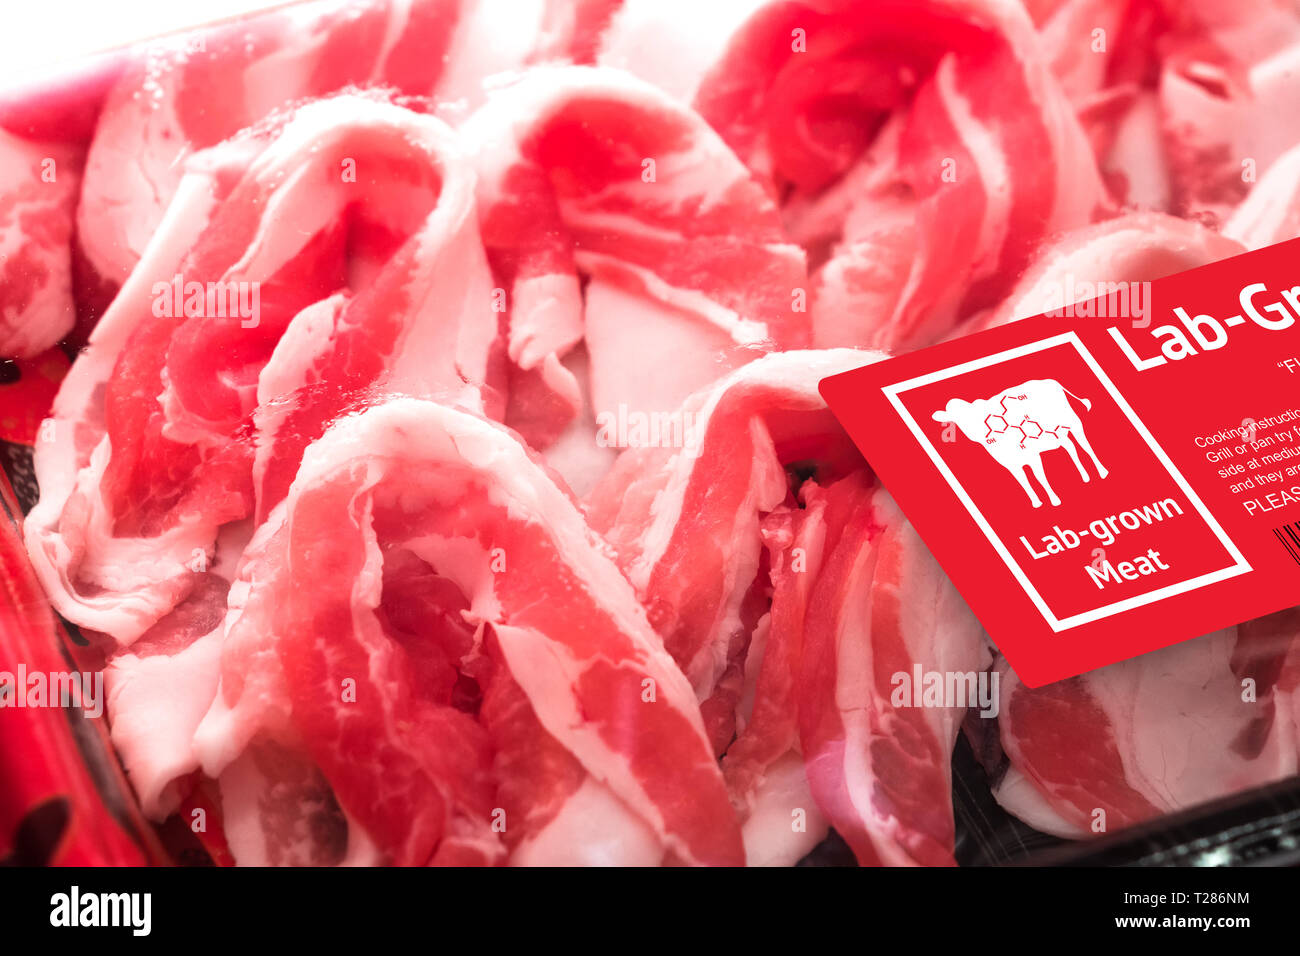 Artificial Meat, Lab-Grown Meat and the Future of Food